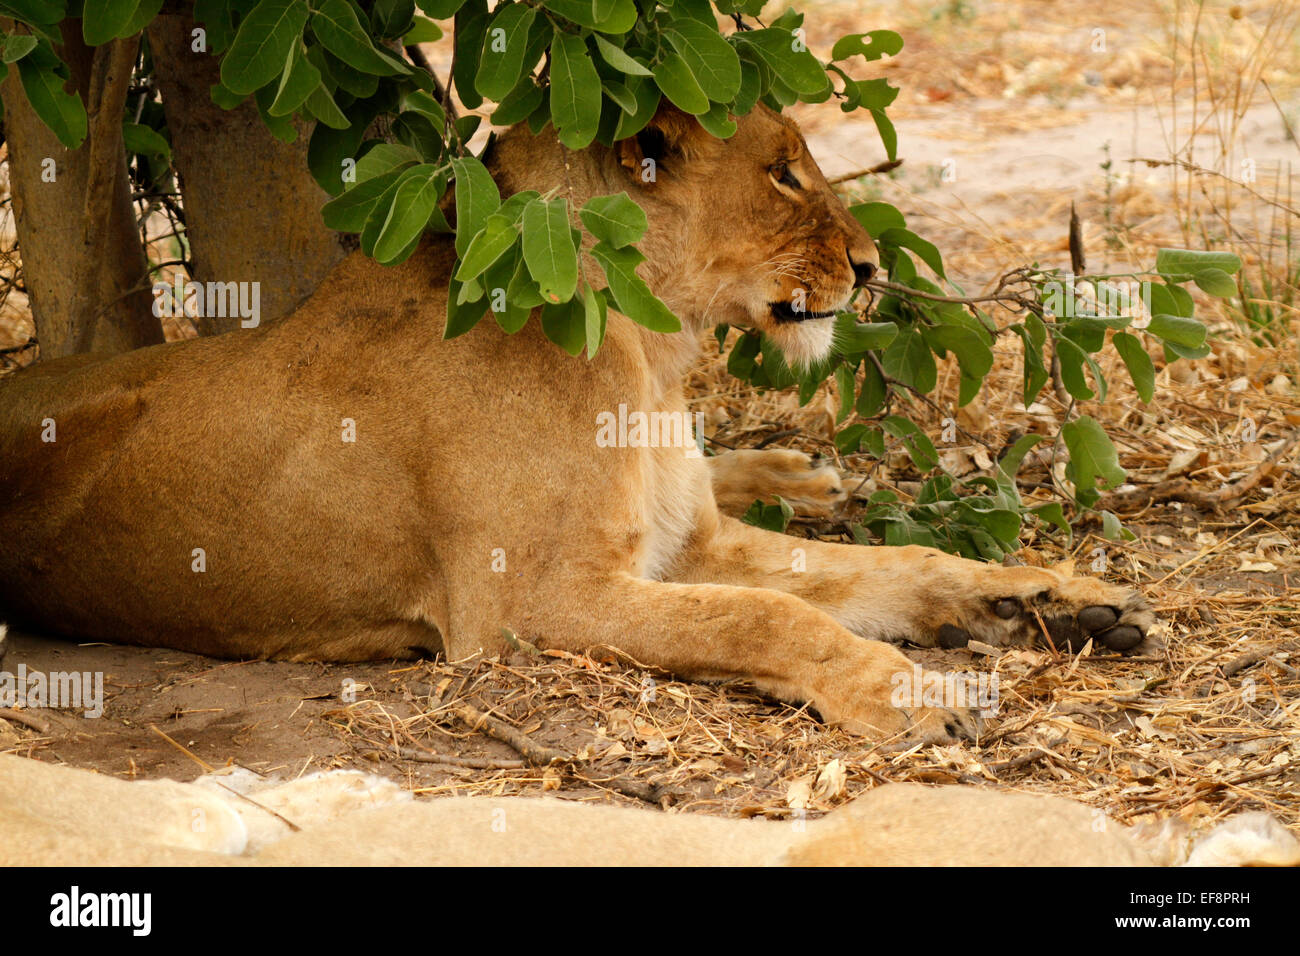 African Lions resting in the shade of a tree on the open plains big powerful cats Africa's top keystone predator Stock Photo